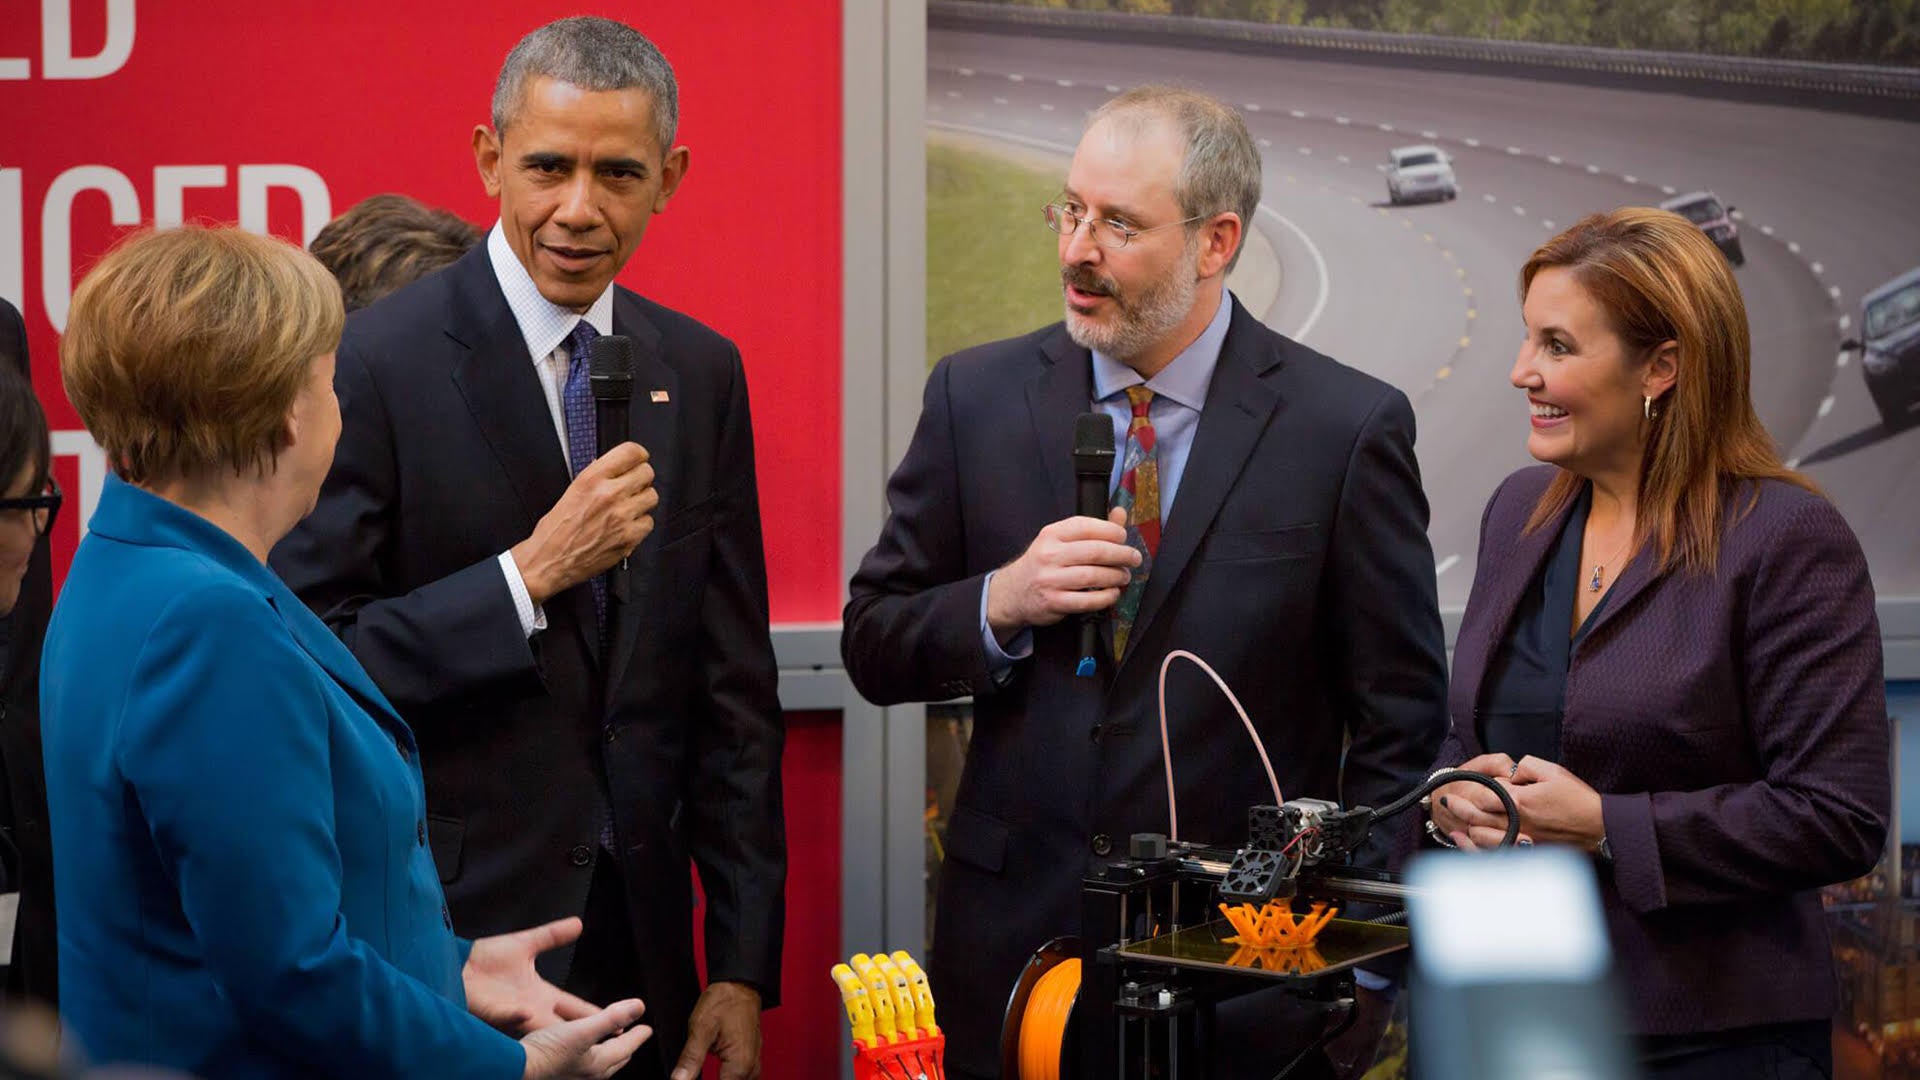 From left to right, German Chancellor Angela Merkel, U.S. President Barack Obama, Rick Pollack, and Ohio Lieutenant Governor Mary Taylor met in 2016 to talk about manufacturing. 